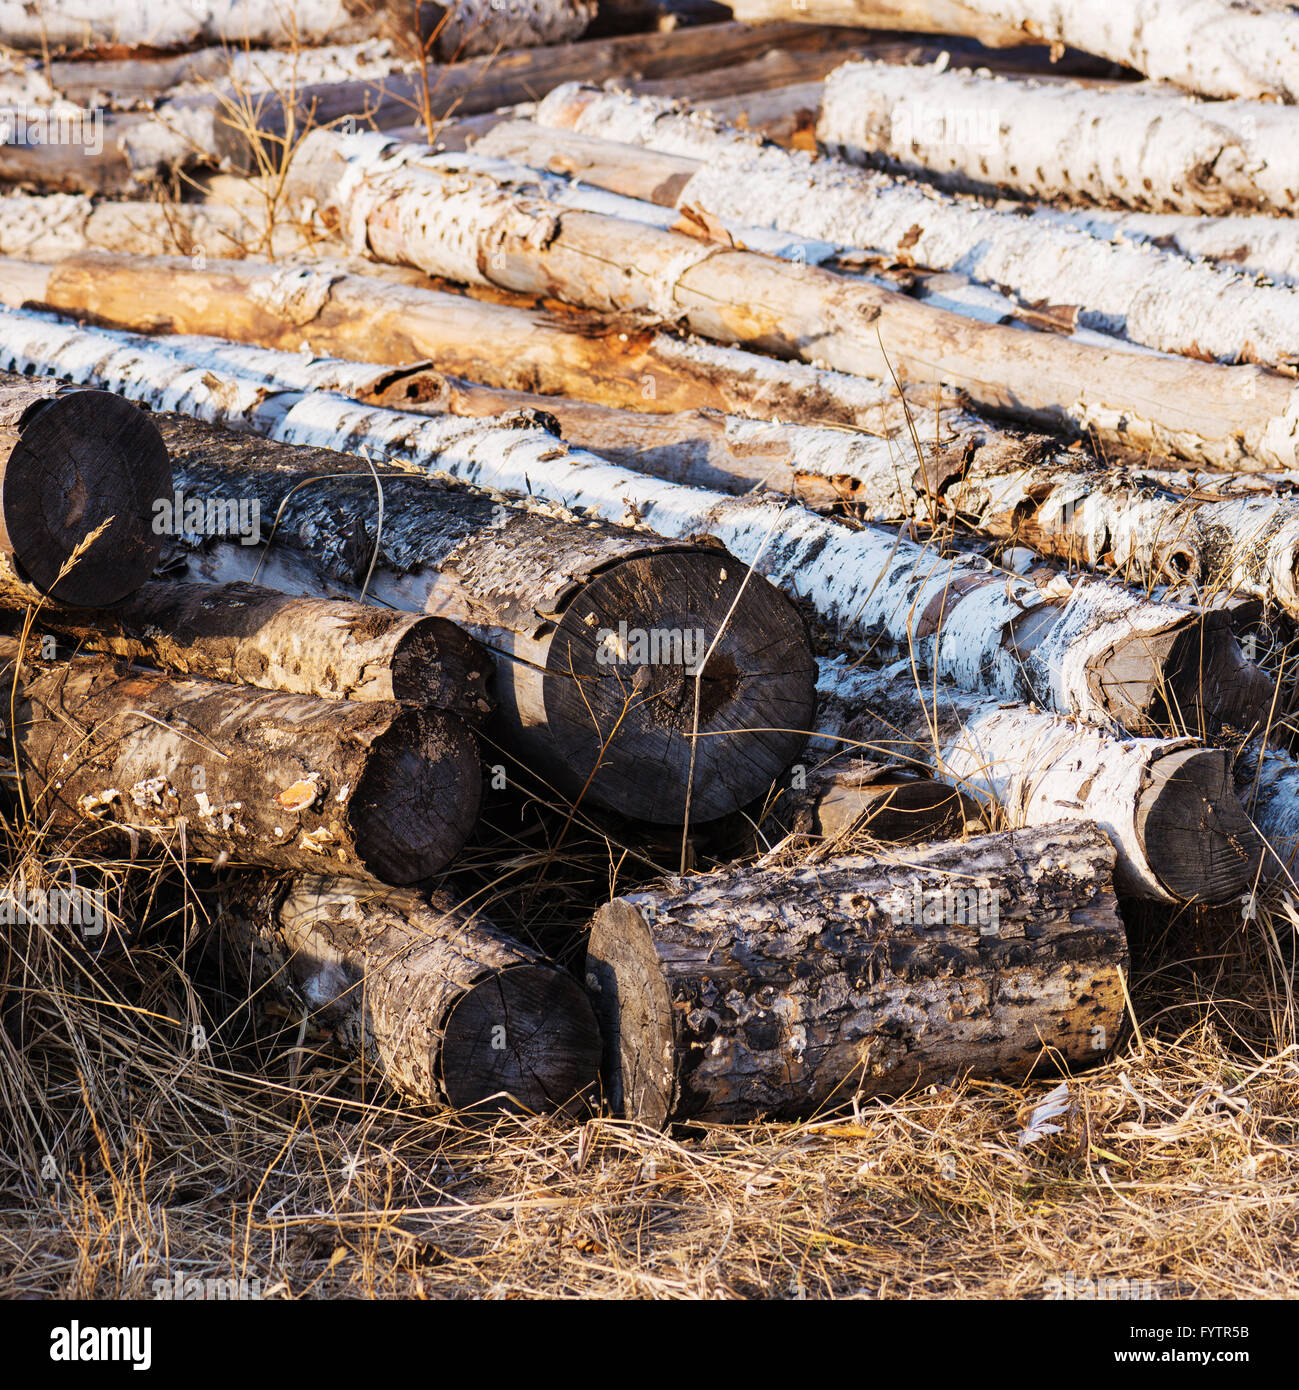 Stacks of birch logs. Natural material, alternative energy. Stock Photo